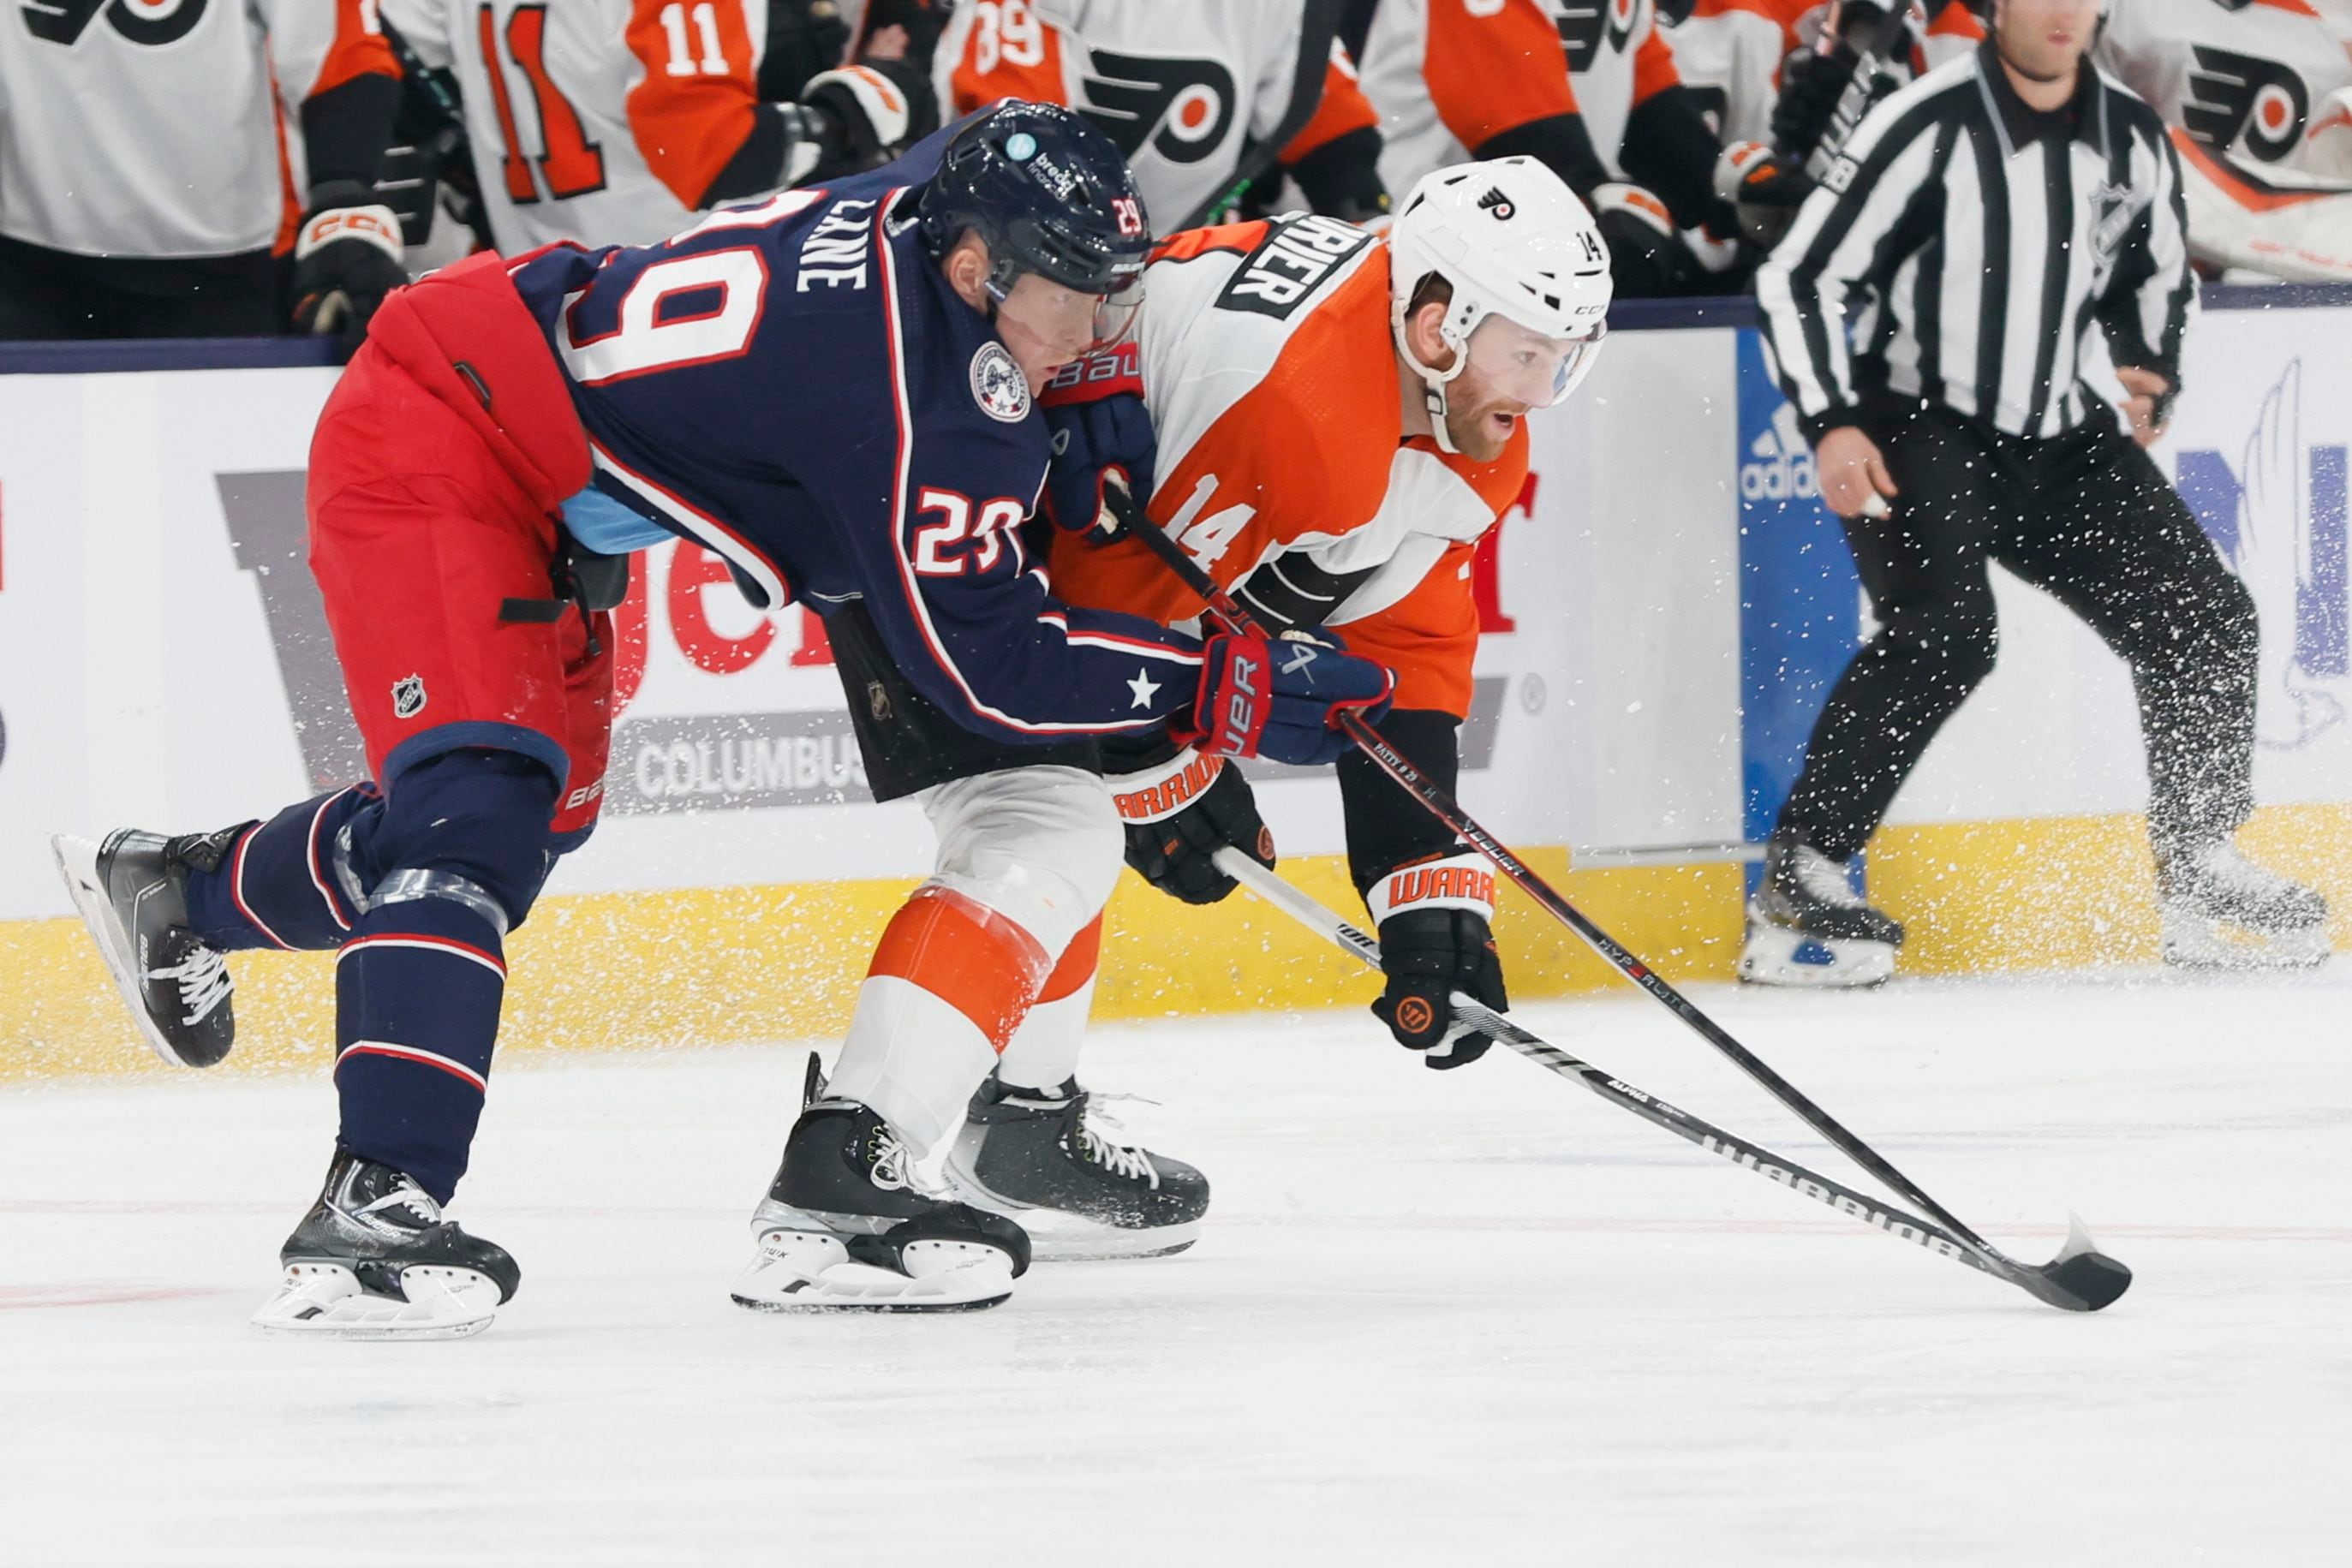 Flyers Defeat Blue Jackets, 4-2, For 1st Win of the Season - Flyers Nation